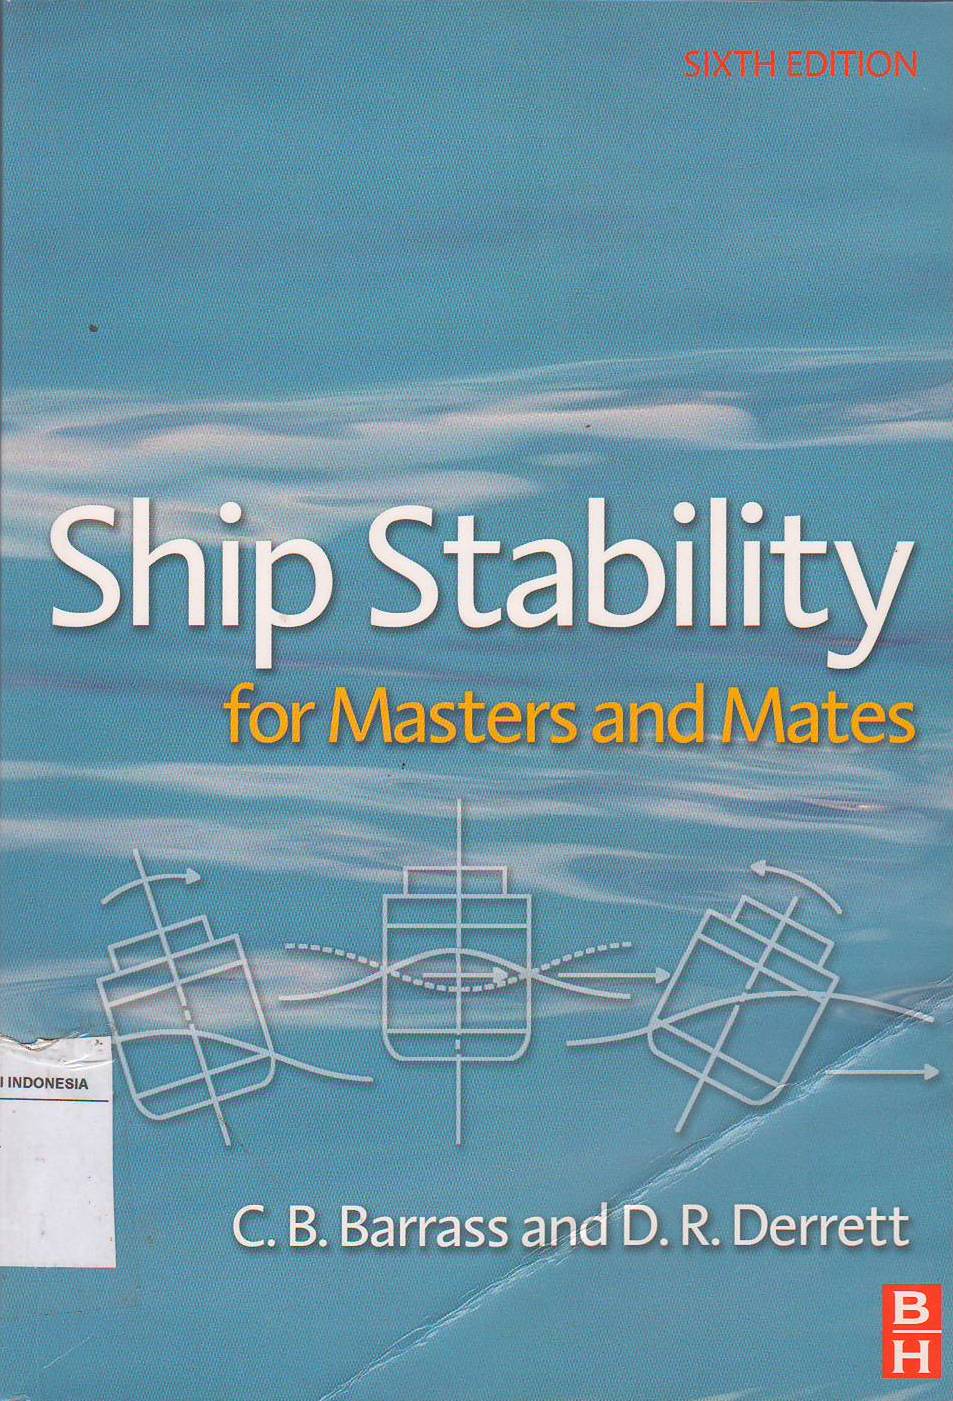 Ship Stability For Masters and Mates (T37) / (T15)